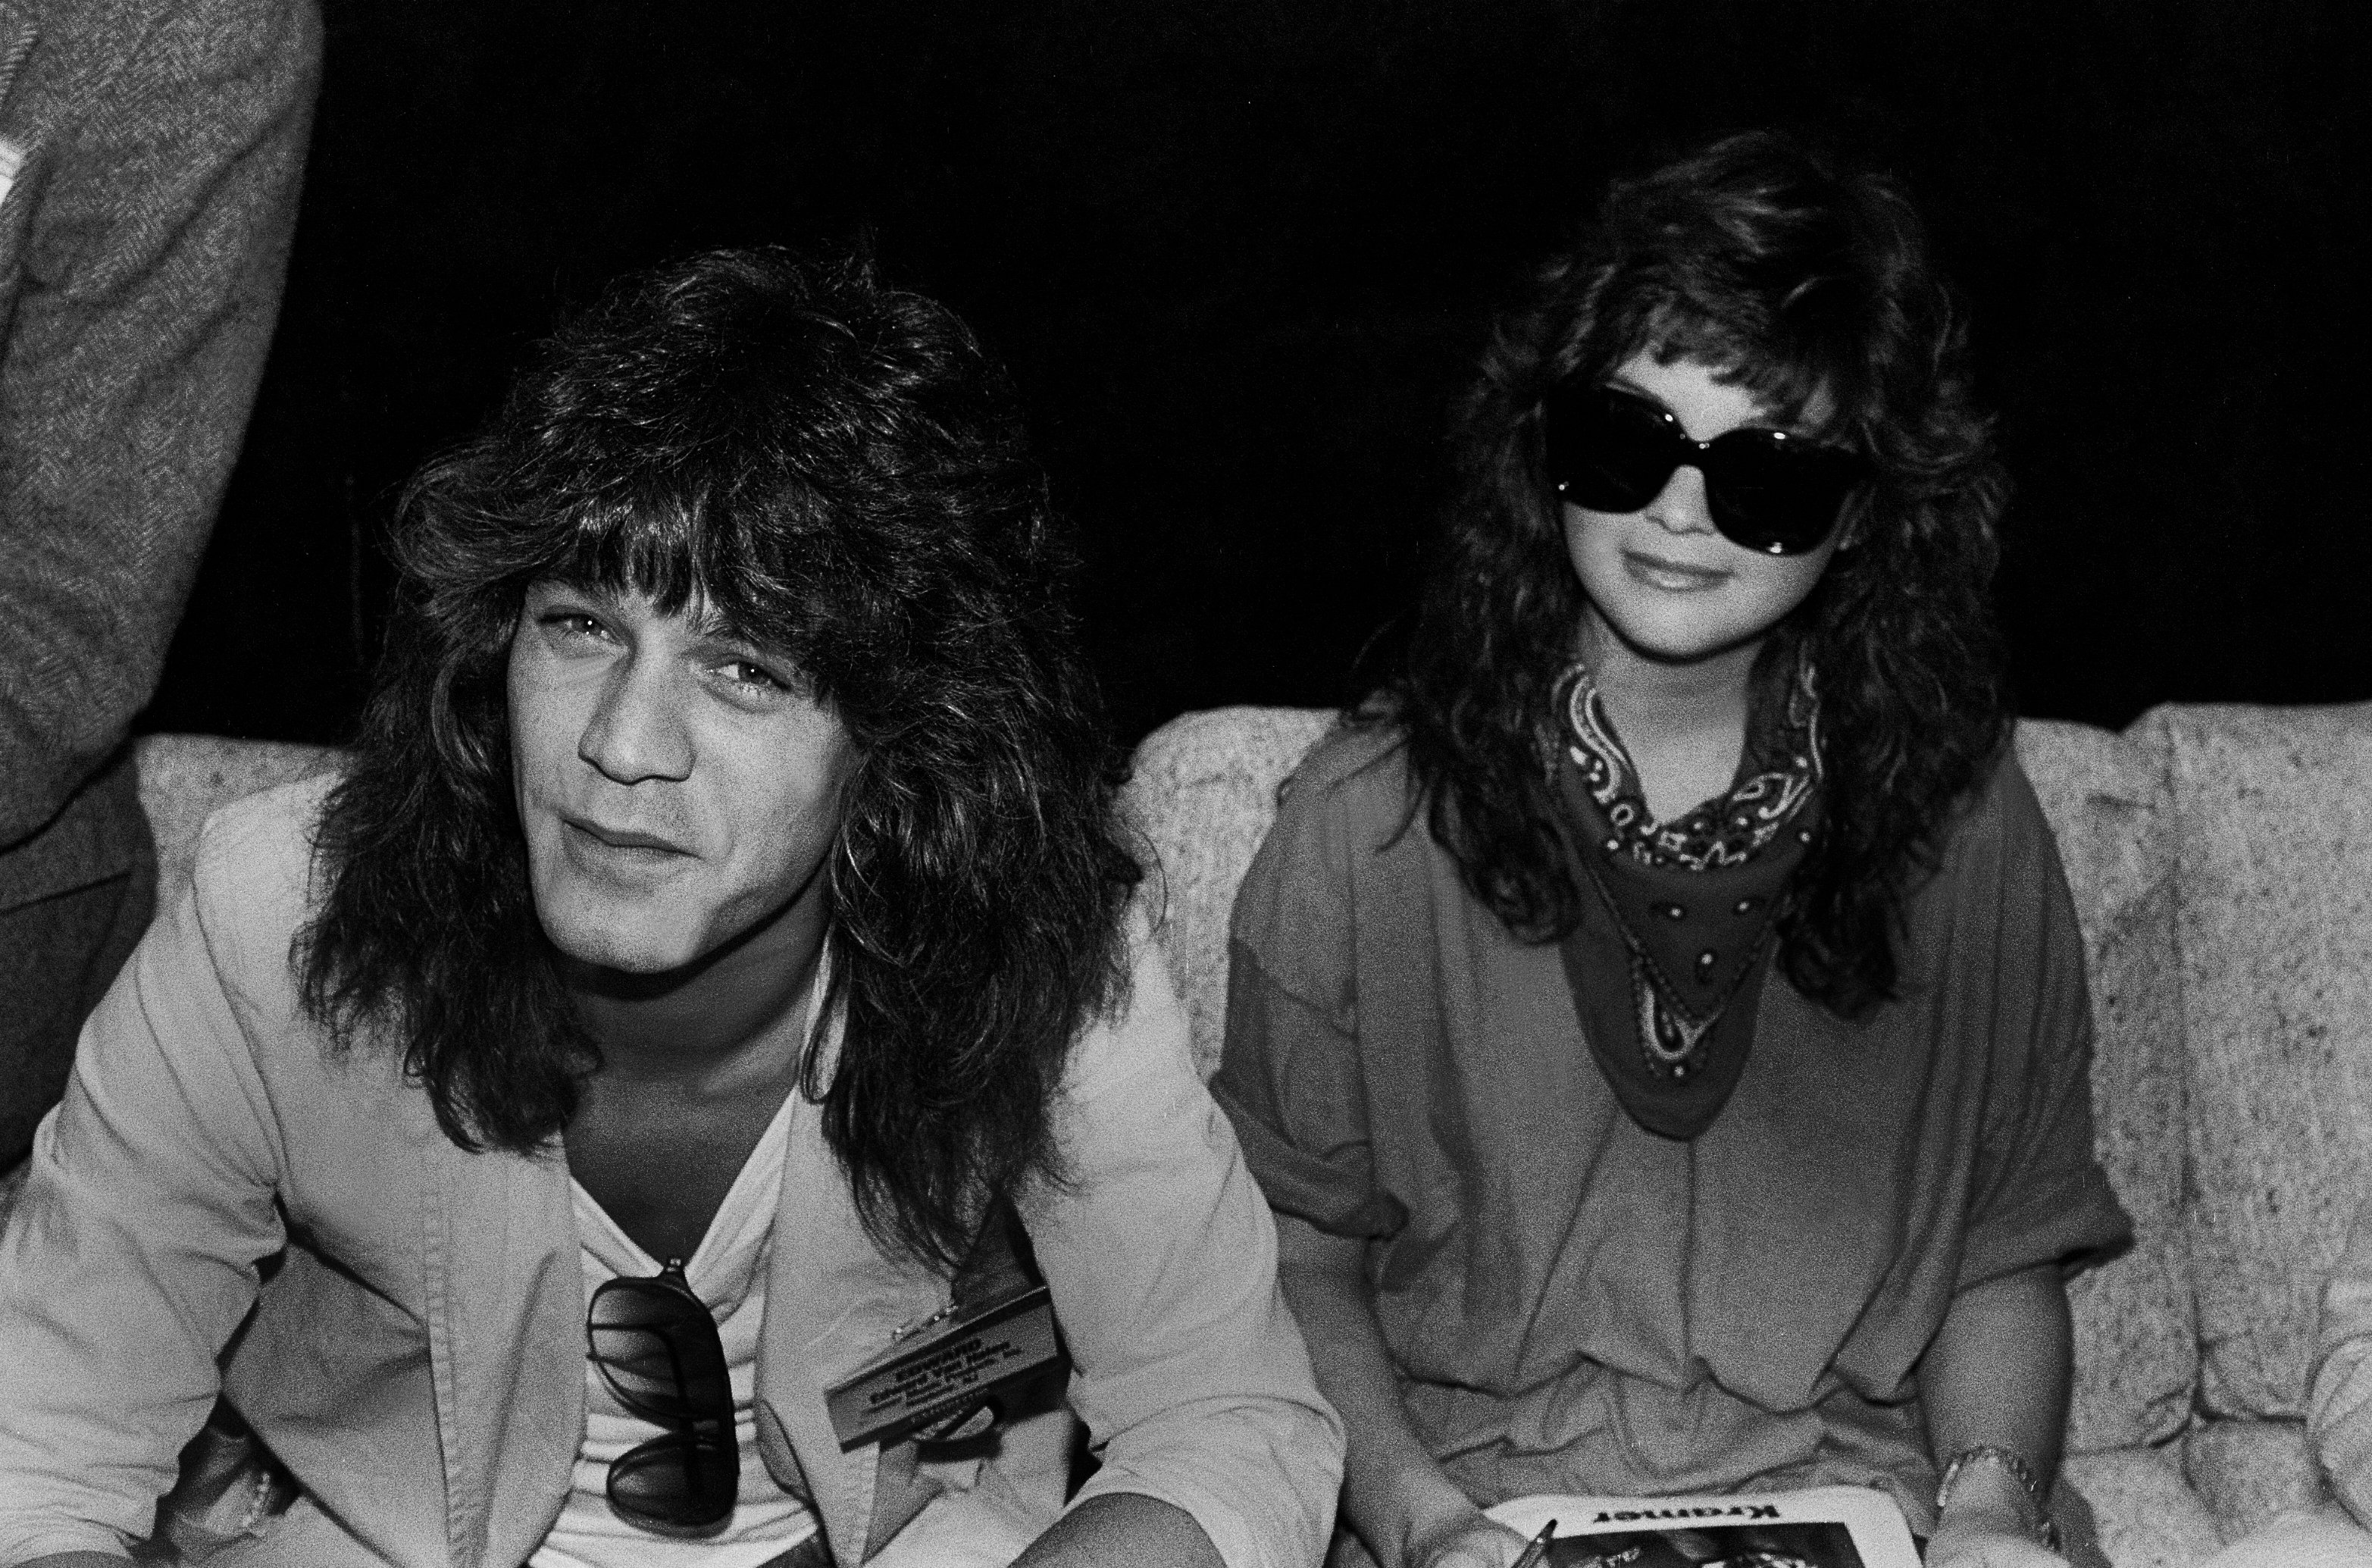 Eddie Van Halen and Valerie Bertinelli attend the NAMM (or National Association of Music Merchants) Show at McCormick Place, Chicago, Illinois, June 19, 1983 | Source: Getty Images 